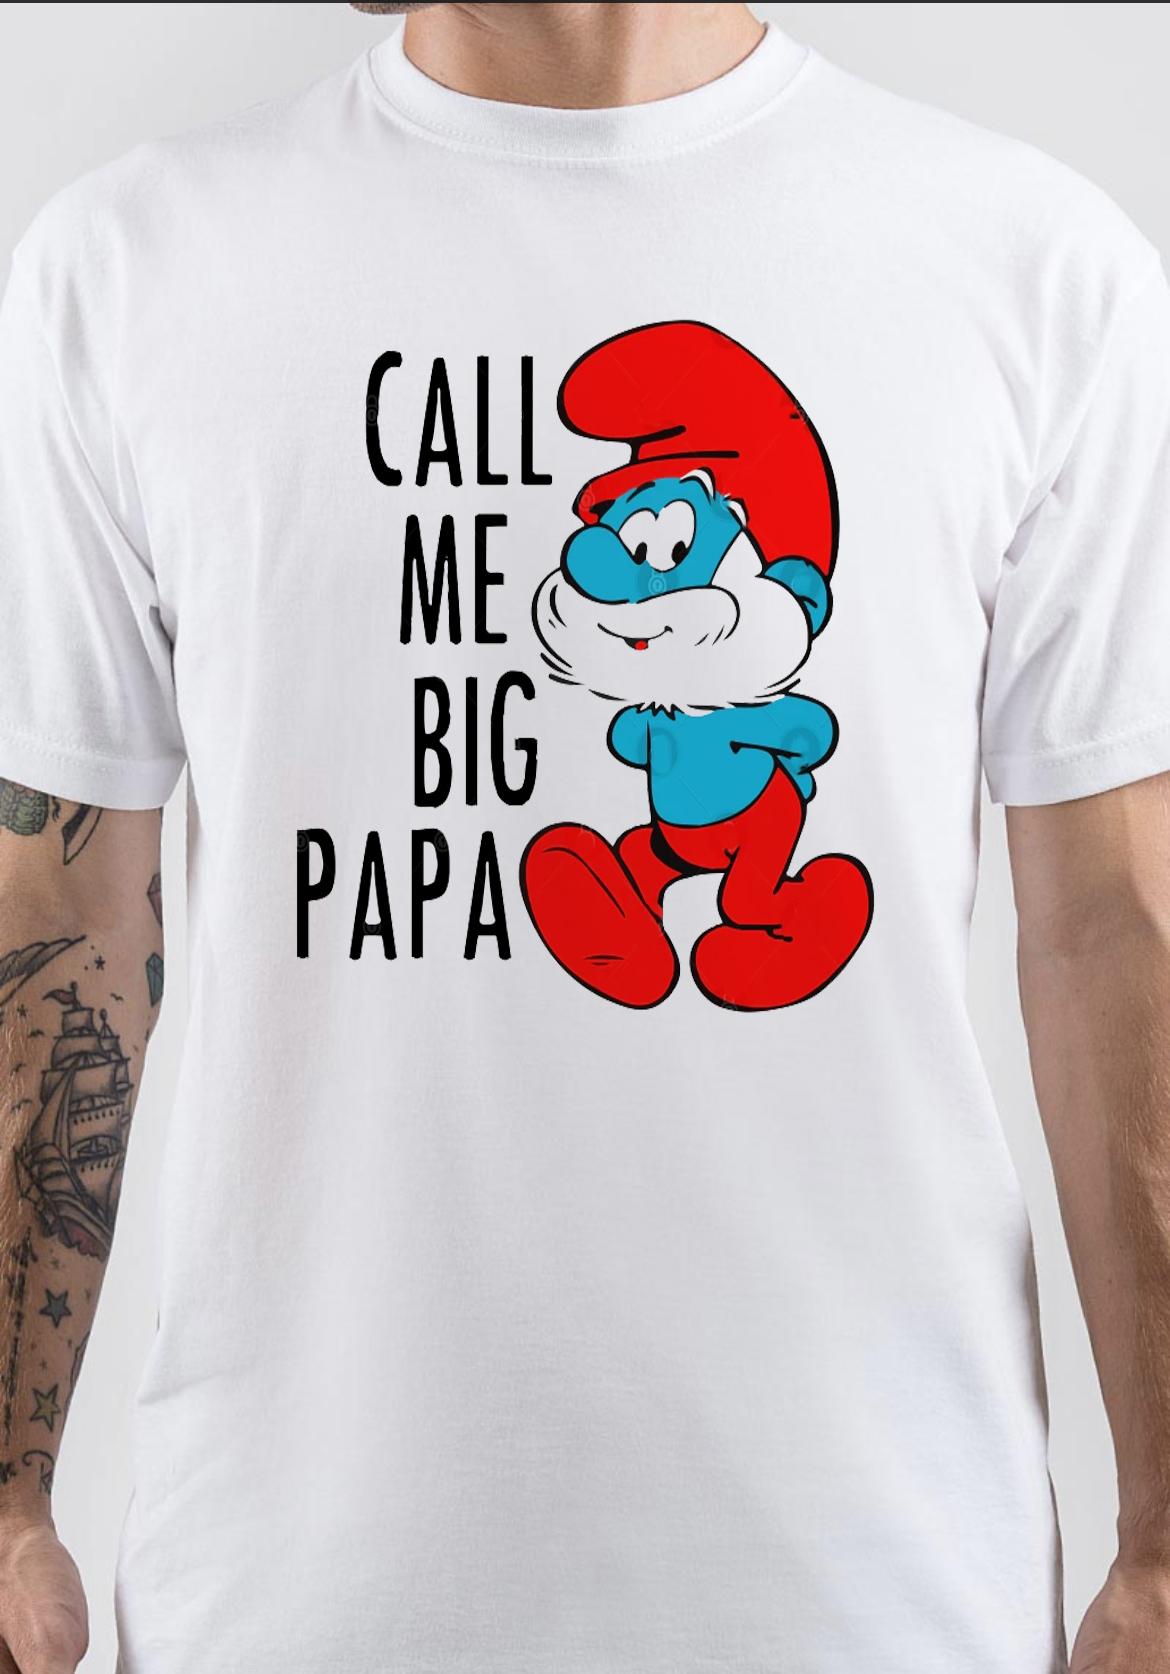 The Smurfs T-Shirt And Merchandise